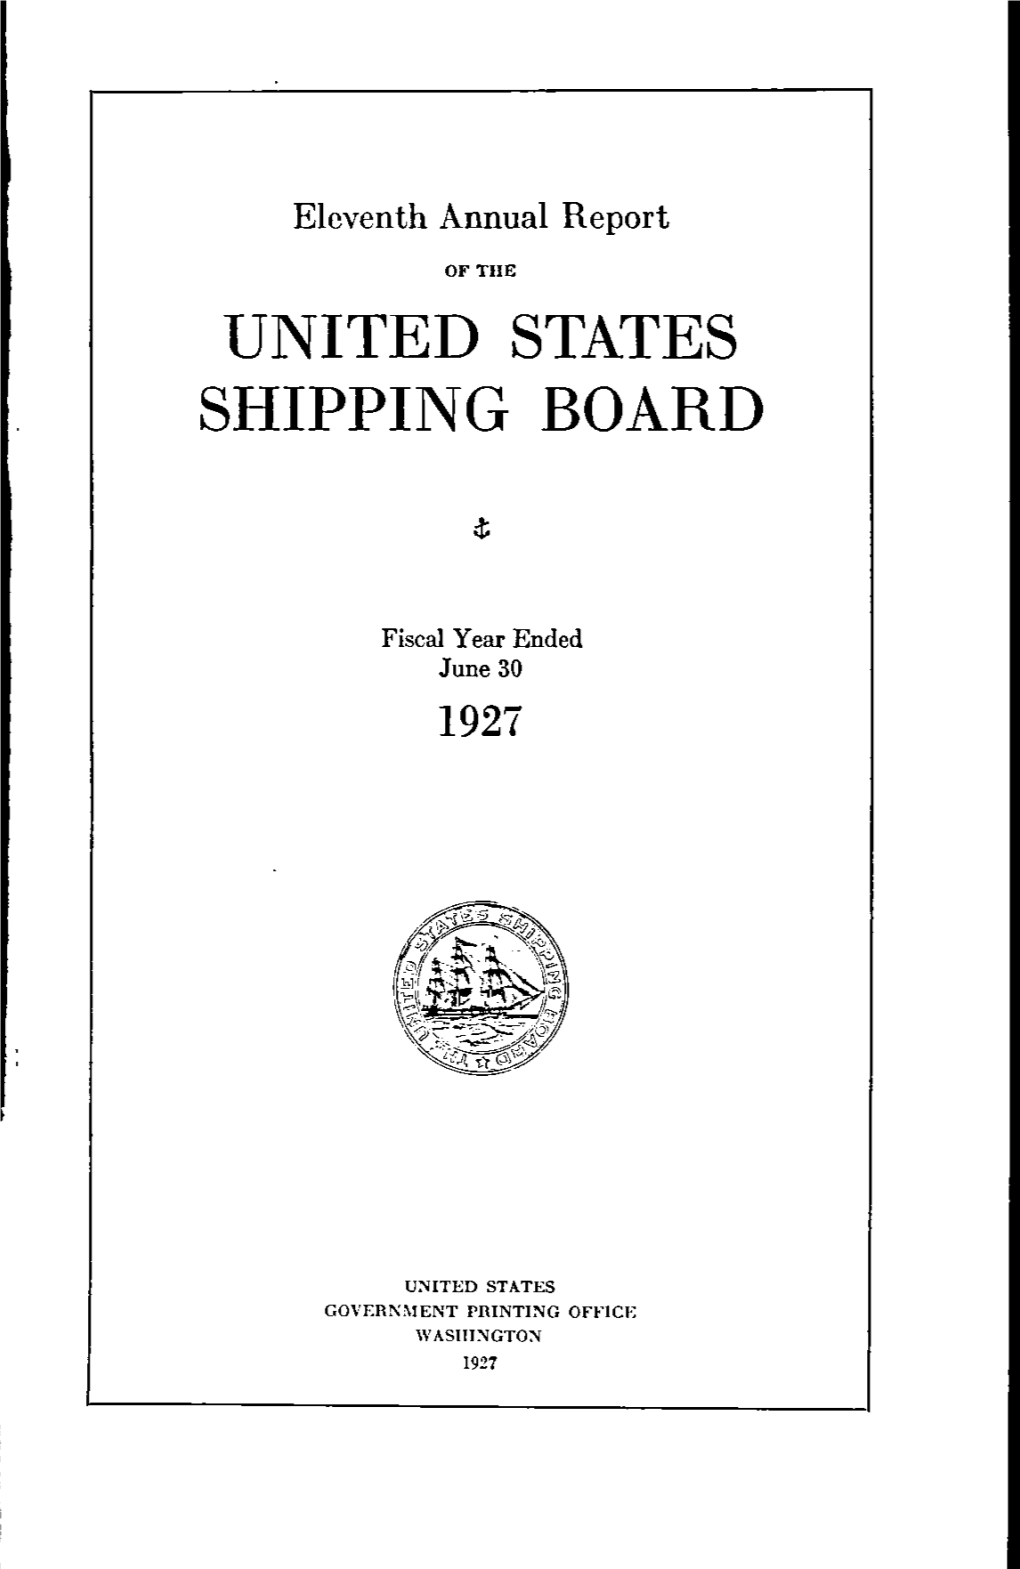 Annual Report for Fiscal Year 1927